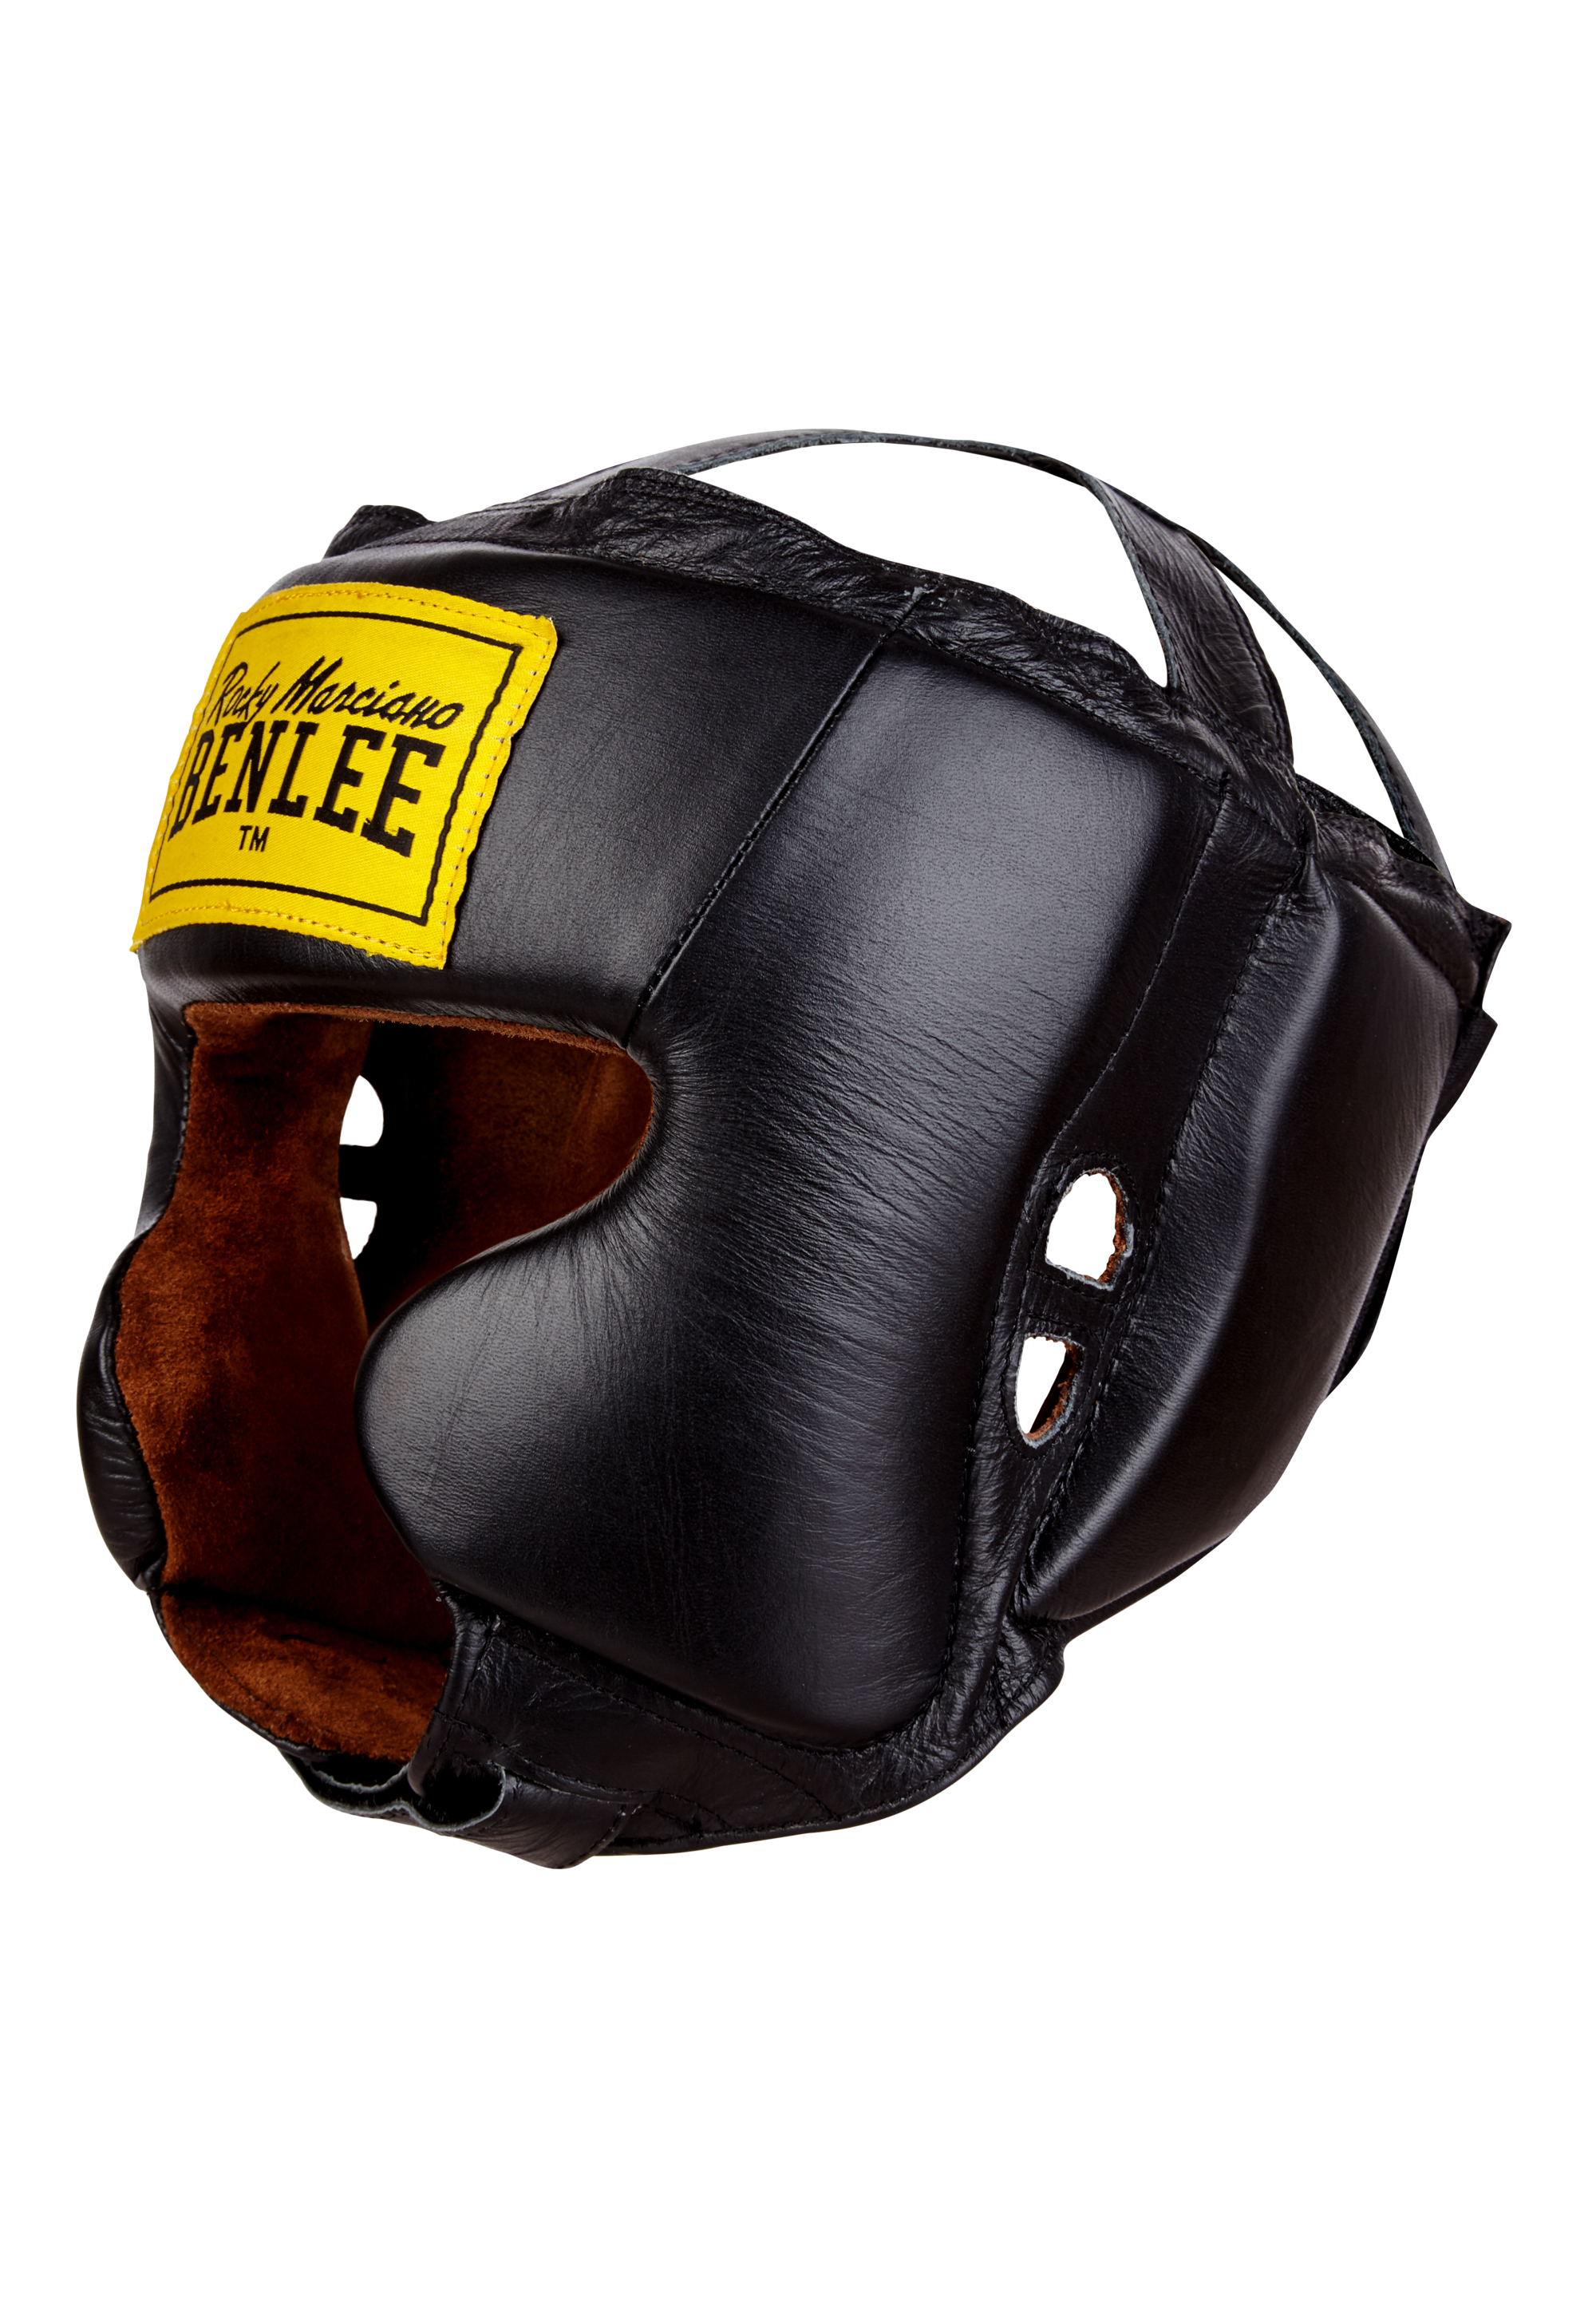 Lonsdale Leather head protection